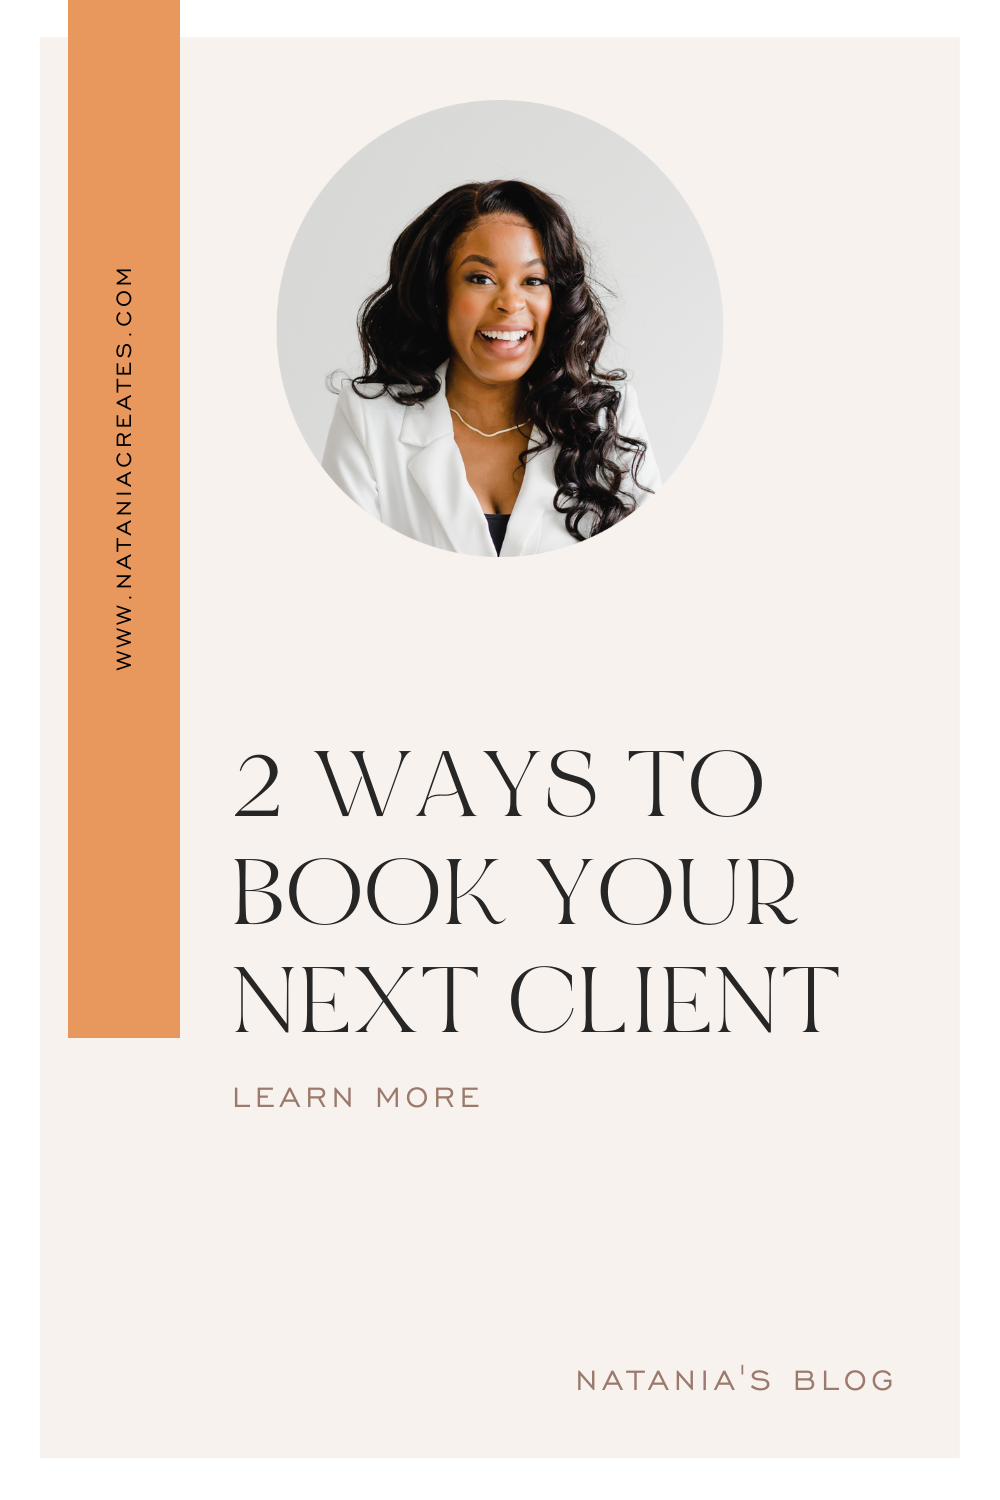 2 ways to book your next client